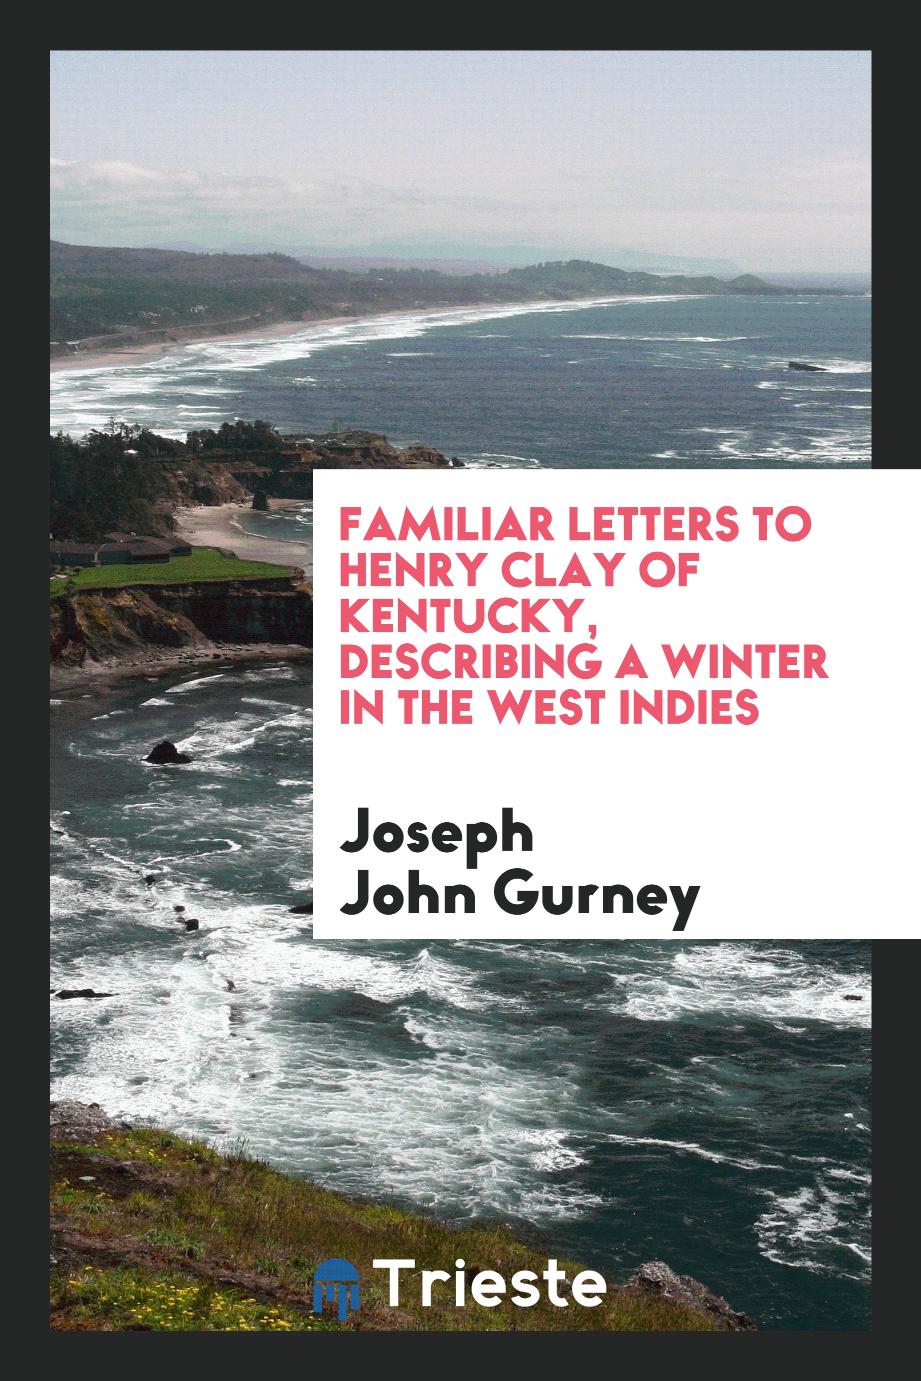 Familiar letters to Henry Clay of Kentucky, describing a winter in the West Indies